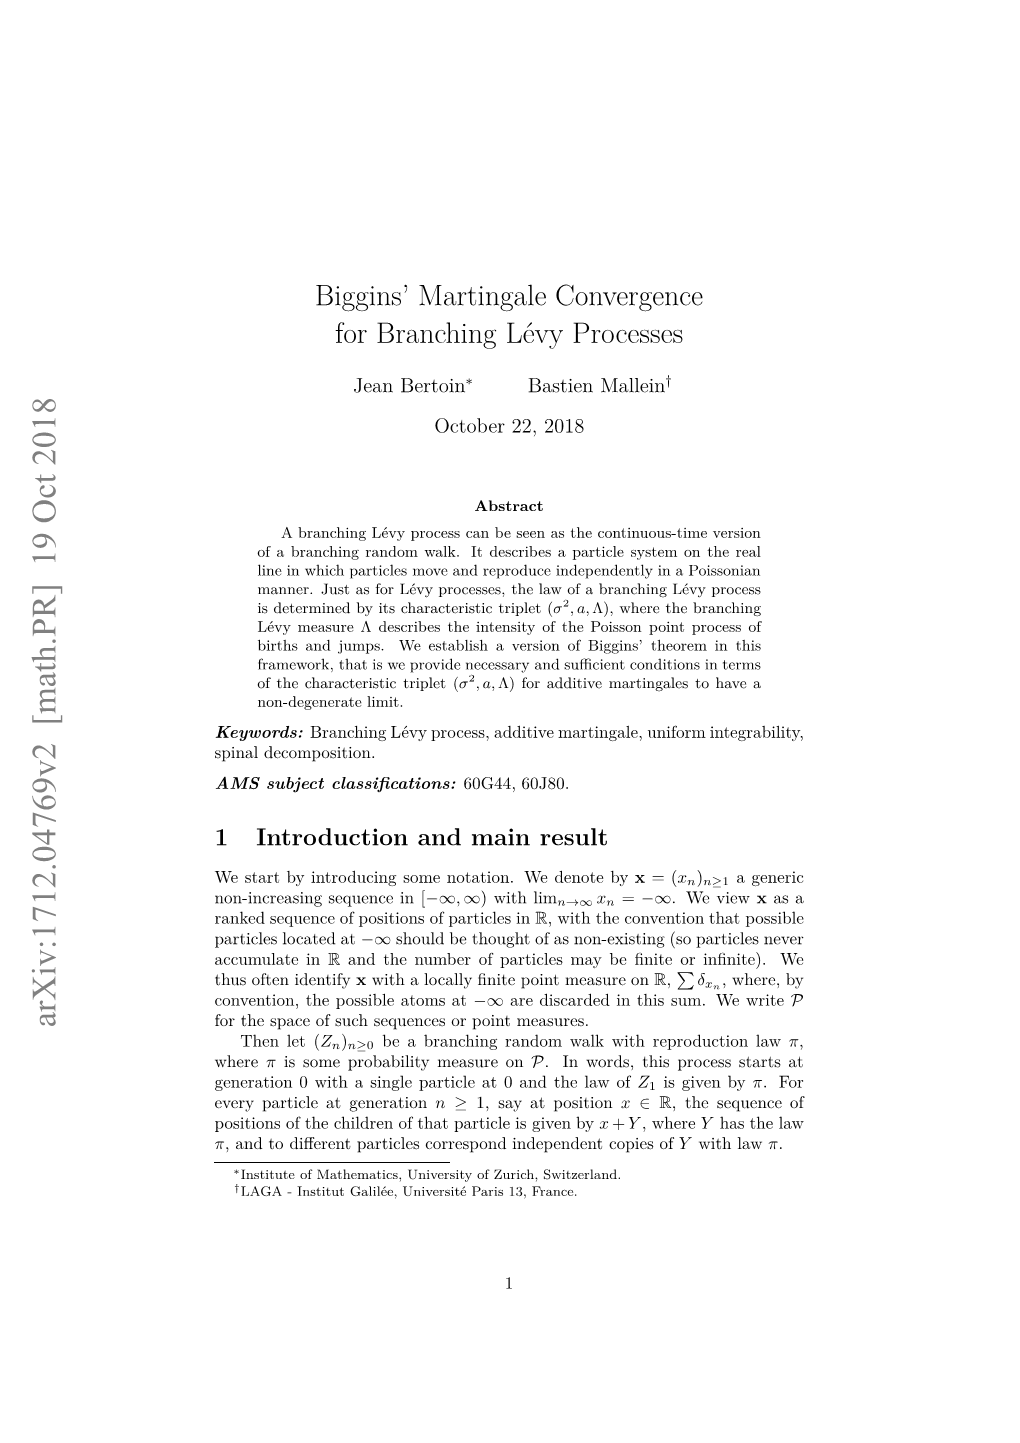 Biggins' Martingale Convergence for Branching L\'Evy Processes